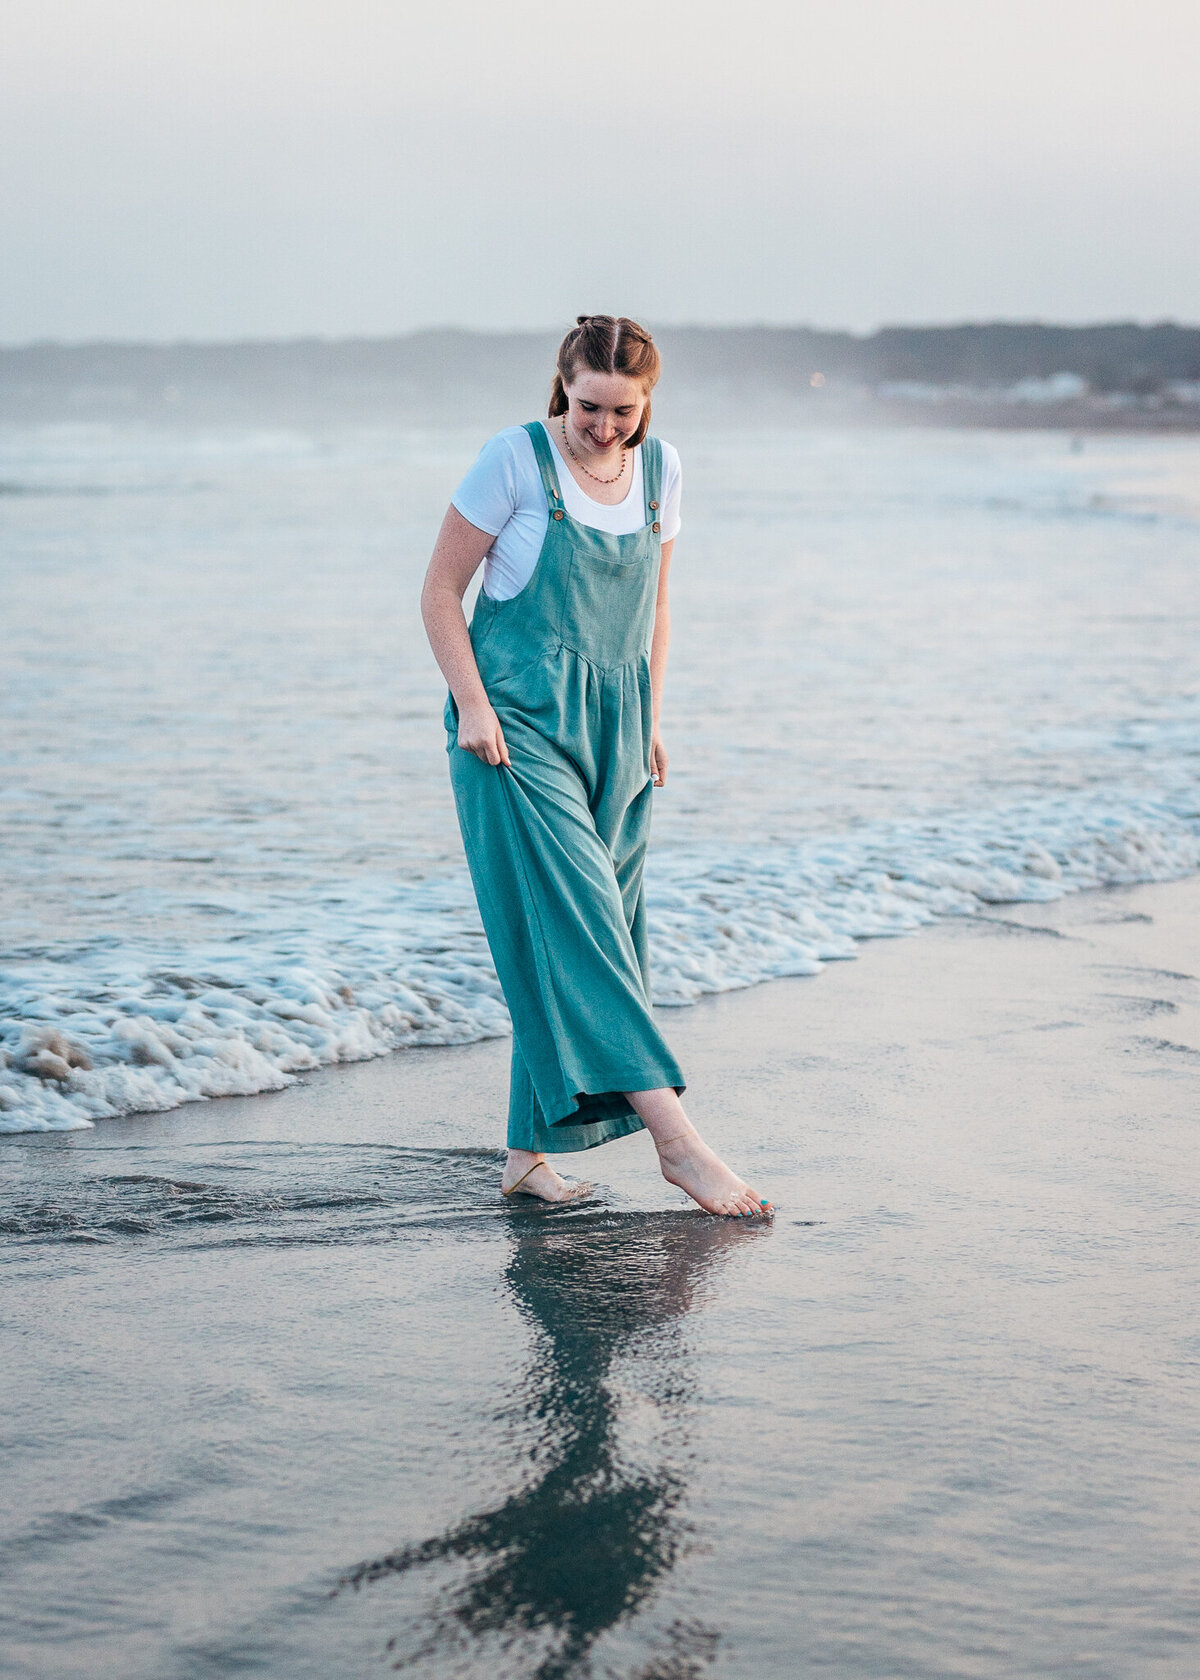 Concord high school senior dipping her toes in the ocean in York ME by Lisa Smith Photography